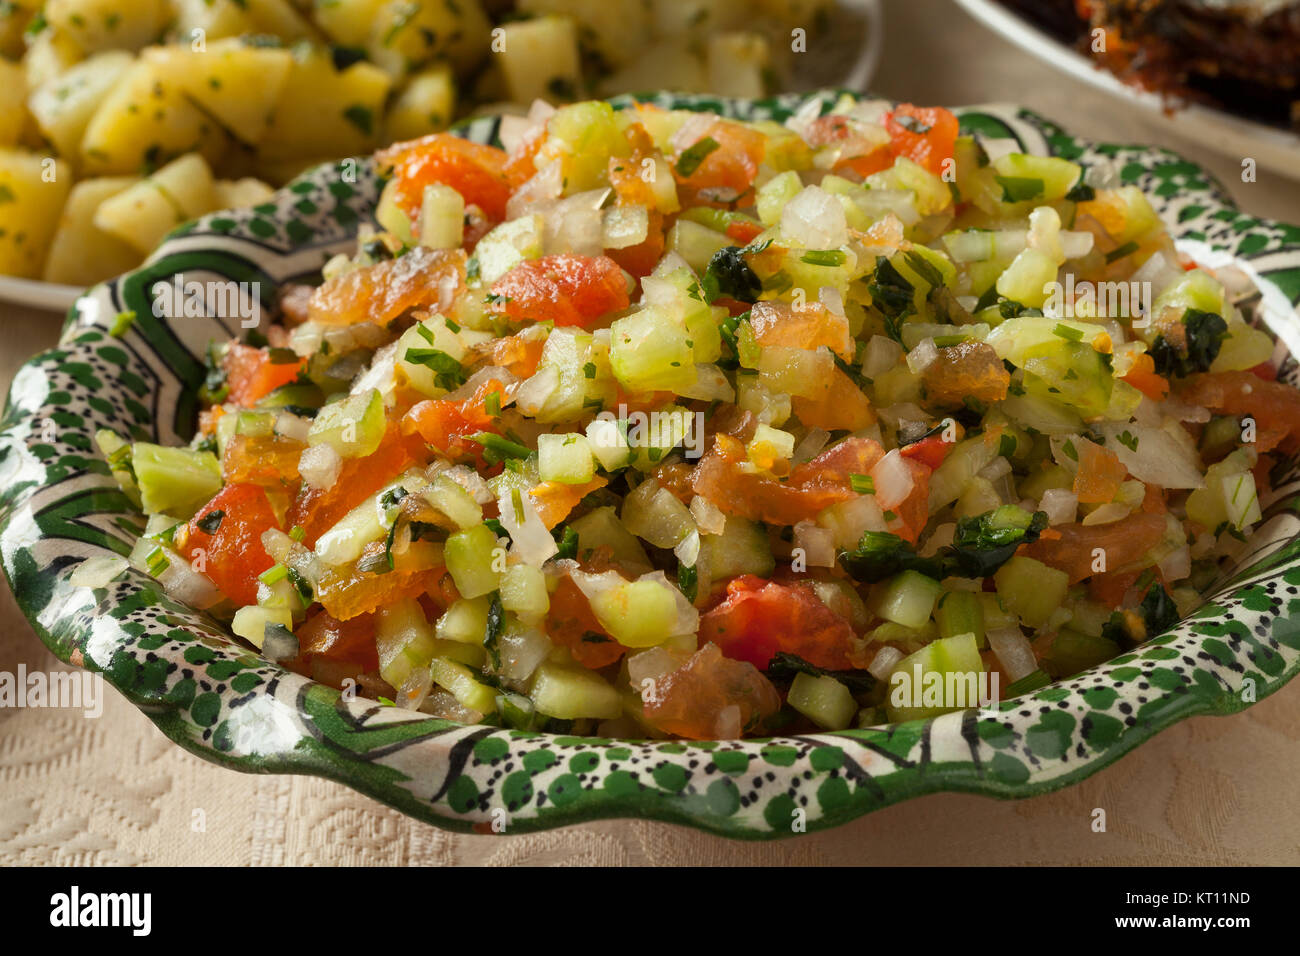 Moroccan dish with fresh made salad from a variety of vegetables close up Stock Photo